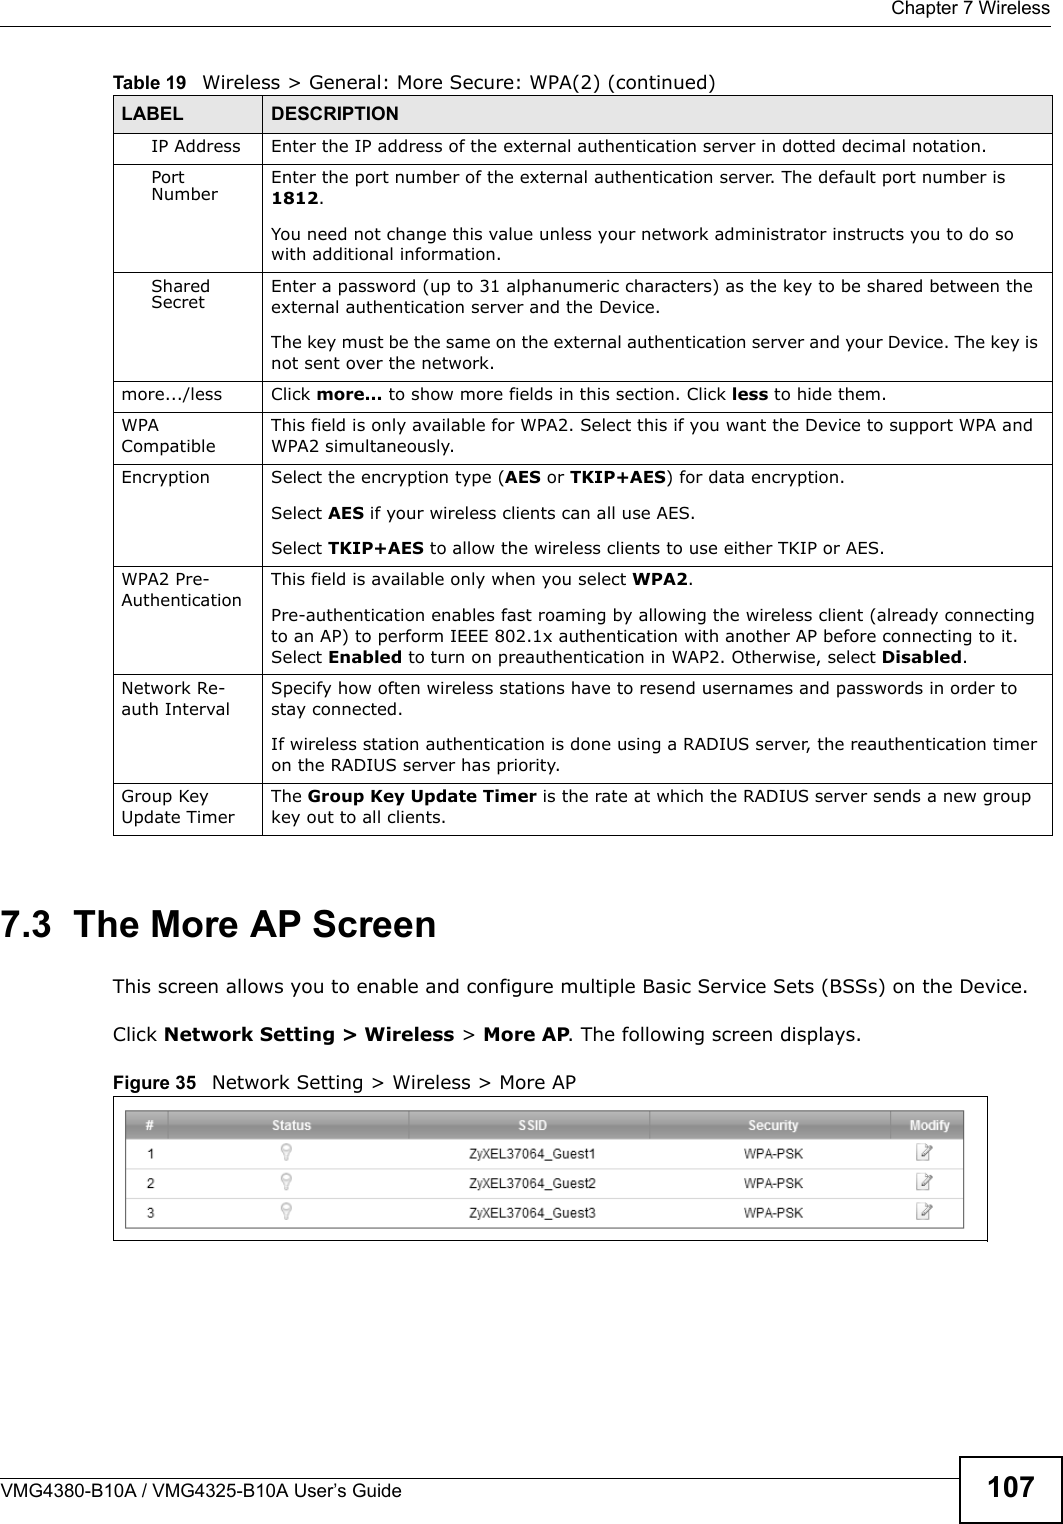  Chapter 7 WirelessVMG4380-B10A / VMG4325-B10A User’s Guide 1077.3  The More AP ScreenThis screen allows you to enable and configure multiple Basic Service Sets (BSSs) on the Device.Click Network Setting &gt; Wireless &gt; More AP. The following screen displays.Figure 35 Network Setting &gt; Wireless &gt; More APIP Address Enter the IP address of the external authentication server in dotted decimal notation.PortNumberEnter the port number of the external authentication server. The default port number is 1812. You need not change this value unless your network administrator instructs you to do sowith additional information. Shared SecretEnter a password (up to 31 alphanumeric characters) as the key to be shared between theexternal authentication server and the Device.The key must be the same on the external authentication server and your Device. The key isnot sent over the network.more.../less Click more... to show more fields in this section. Click less to hide them.WPA CompatibleThis field is only available for WPA2. Select this if you want the Device to support WPA and WPA2 simultaneously.Encryption Select the encryption type (AES or TKIP+AES) for data encryption.Select AES if your wireless clients can all use AES.Select TKIP+AES to allow the wireless clients to use either TKIP or AES.WPA2 Pre-AuthenticationThis field is available only when you select WPA2.Pre-authentication enables fast roaming by allowing the wireless client (already connecting to an AP) to perform IEEE 802.1x authentication with another AP before connecting to it. Select Enabled to turn on preauthentication in WAP2. Otherwise, select Disabled.Network Re-auth IntervalSpecify how often wireless stations have to resend usernames and passwords in order tostay connected.If wireless station authentication is done using a RADIUS server, the reauthentication timer on the RADIUS server has priority.Group Key Update TimerThe Group Key Update Timer is the rate at which the RADIUS server sends a new group key out to all clients.Table 19   Wireless &gt; General: More Secure: WPA(2) (continued)LABEL DESCRIPTION